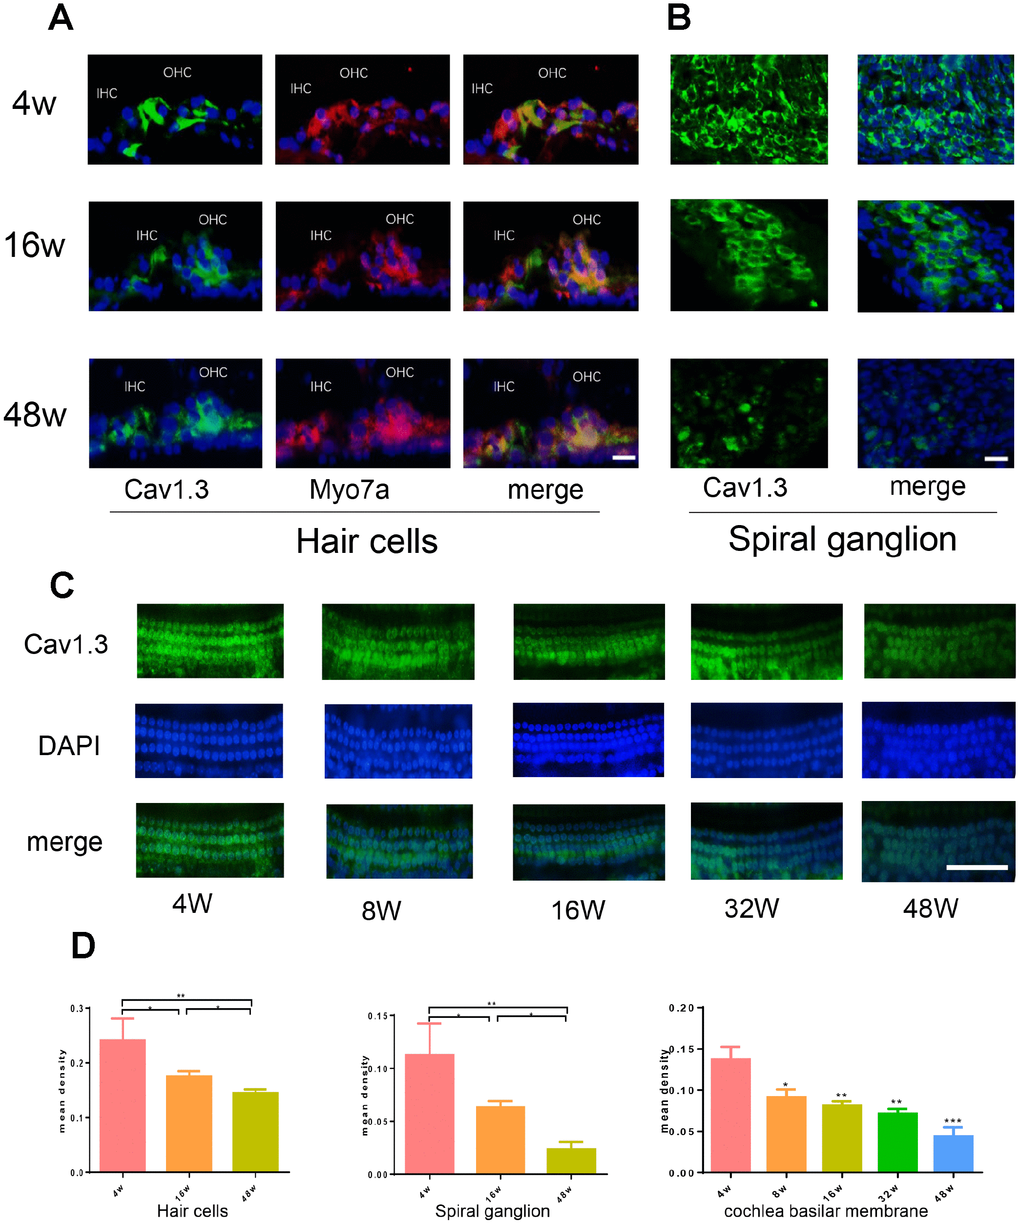 Age-related Cav1.3 expression in cochlea. (A, B) immunofluorescence of CaV1.3(green) and Myo7a (red) in the organ of Corti (left) and spiral ganglion (right) (magnification, ×400), nuclei was visualized by DAPI (blue). (C) the immunofluorescent staining for CaV1.3 (green) in the whole cochlear basilar membrane. (D) quantitative analysis of CaV1.3 expression in hair cells, spiral ganglion and cochlea basilar membrane.